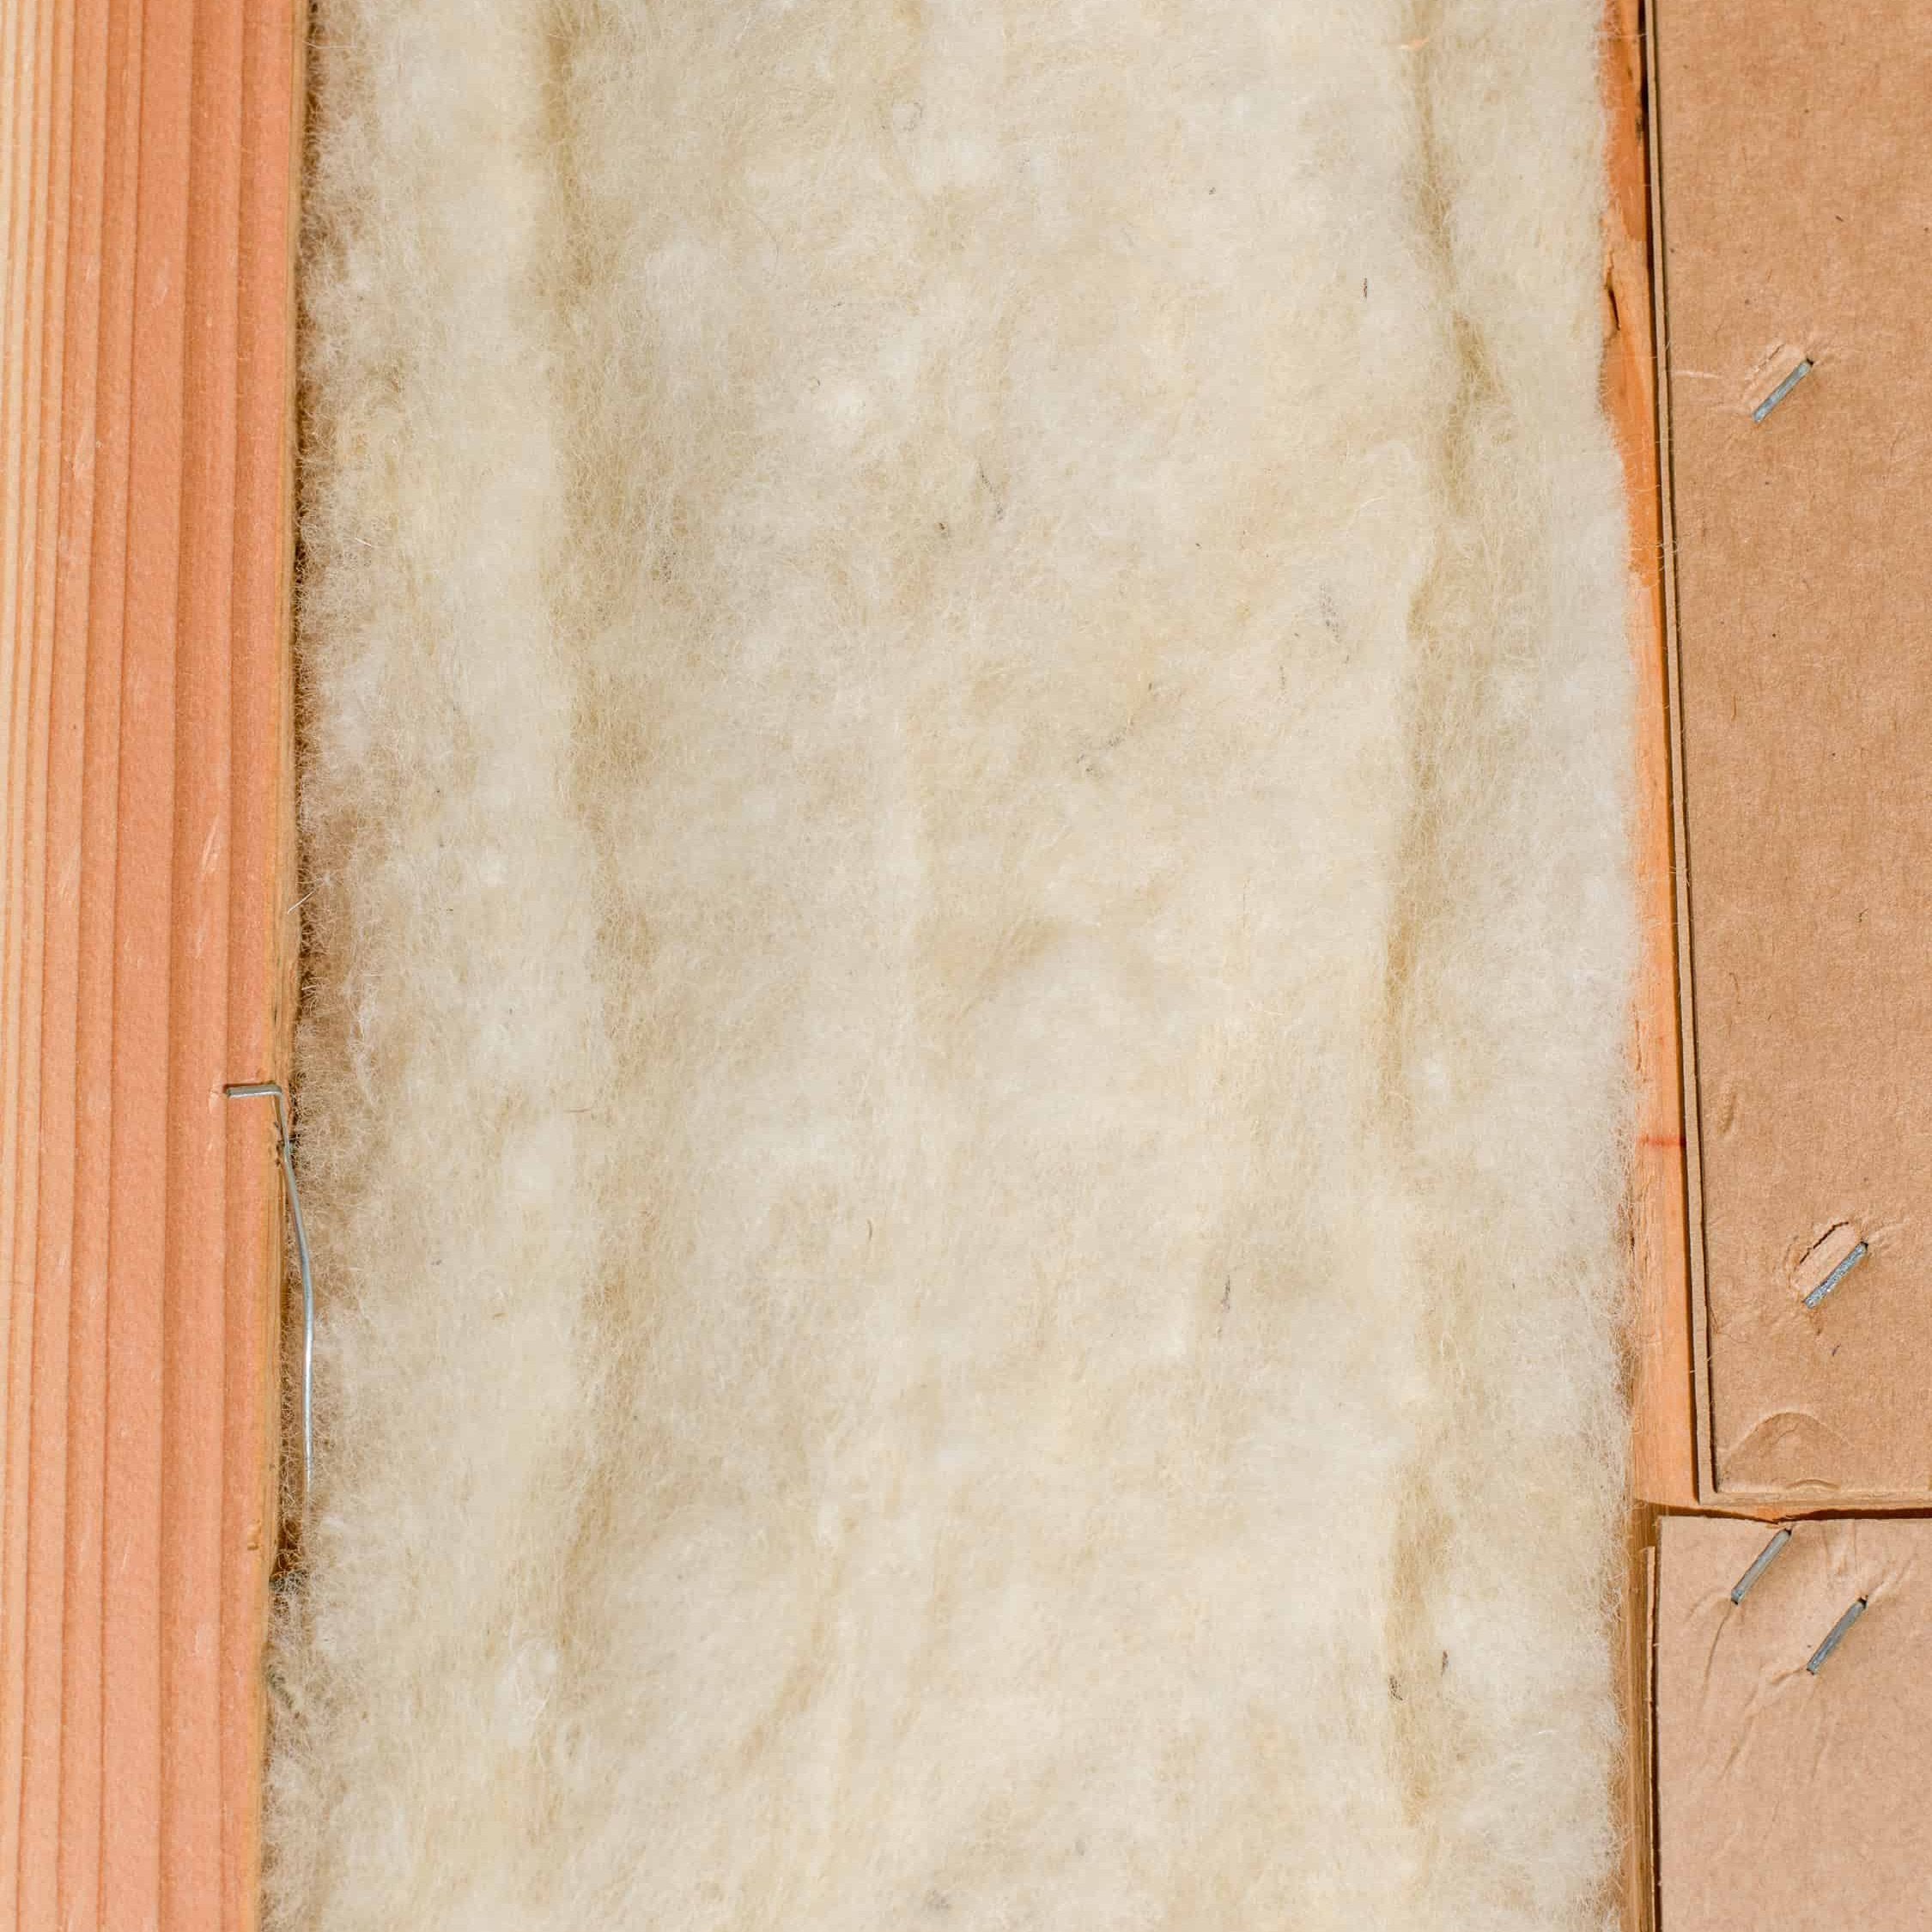 Cut Havelock Wool insulation batts easily to fit into smaller cavities.